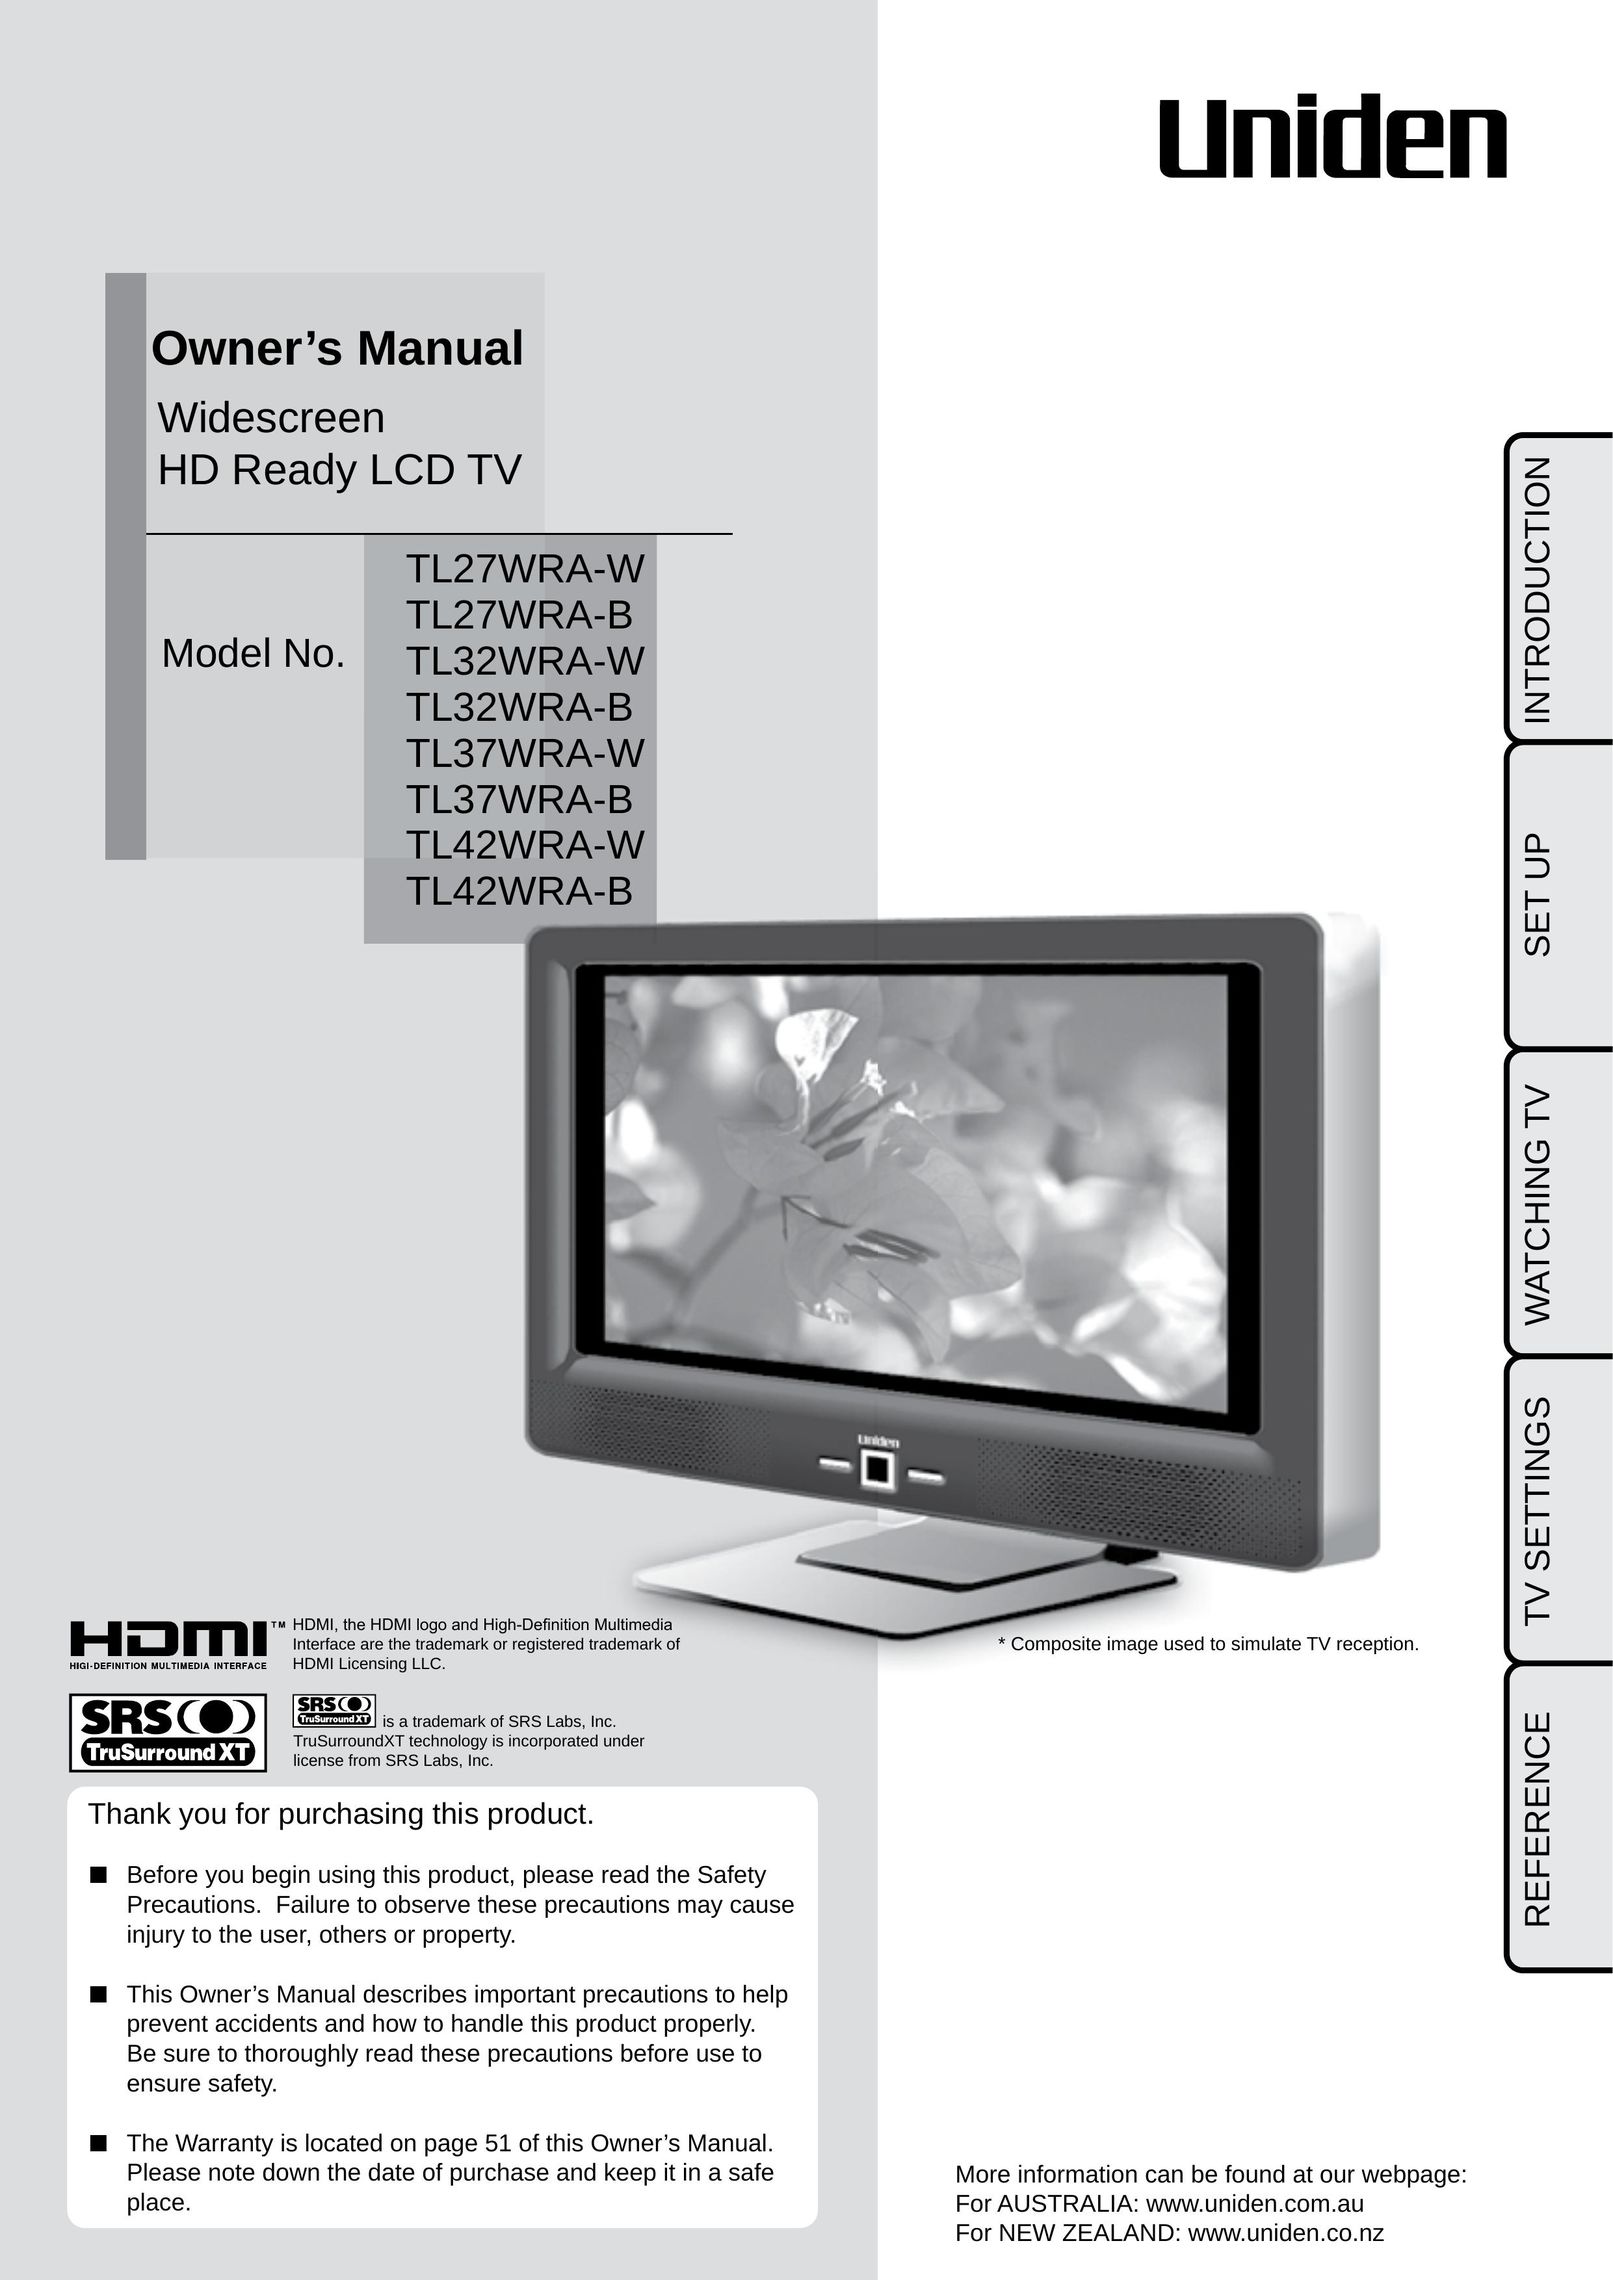 Uniden TL42WRA-W Flat Panel Television User Manual